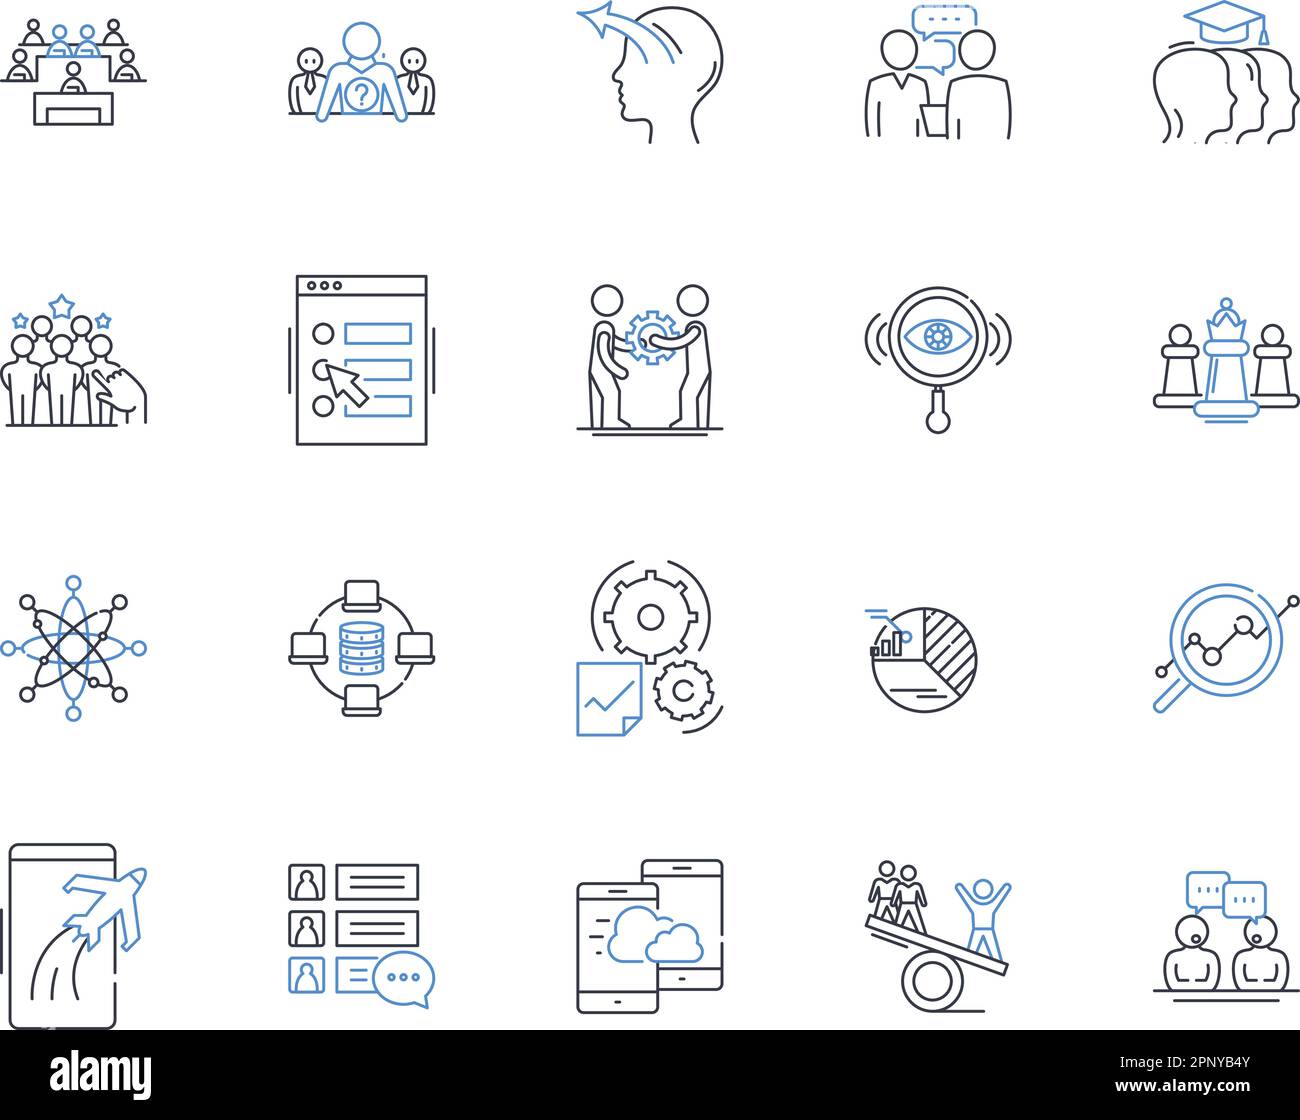 Market research line icons collection. Surveys, Analytics, Demographics, Focus groups, Questionnaires, Data analysis, Consumer insights vector and Stock Vector